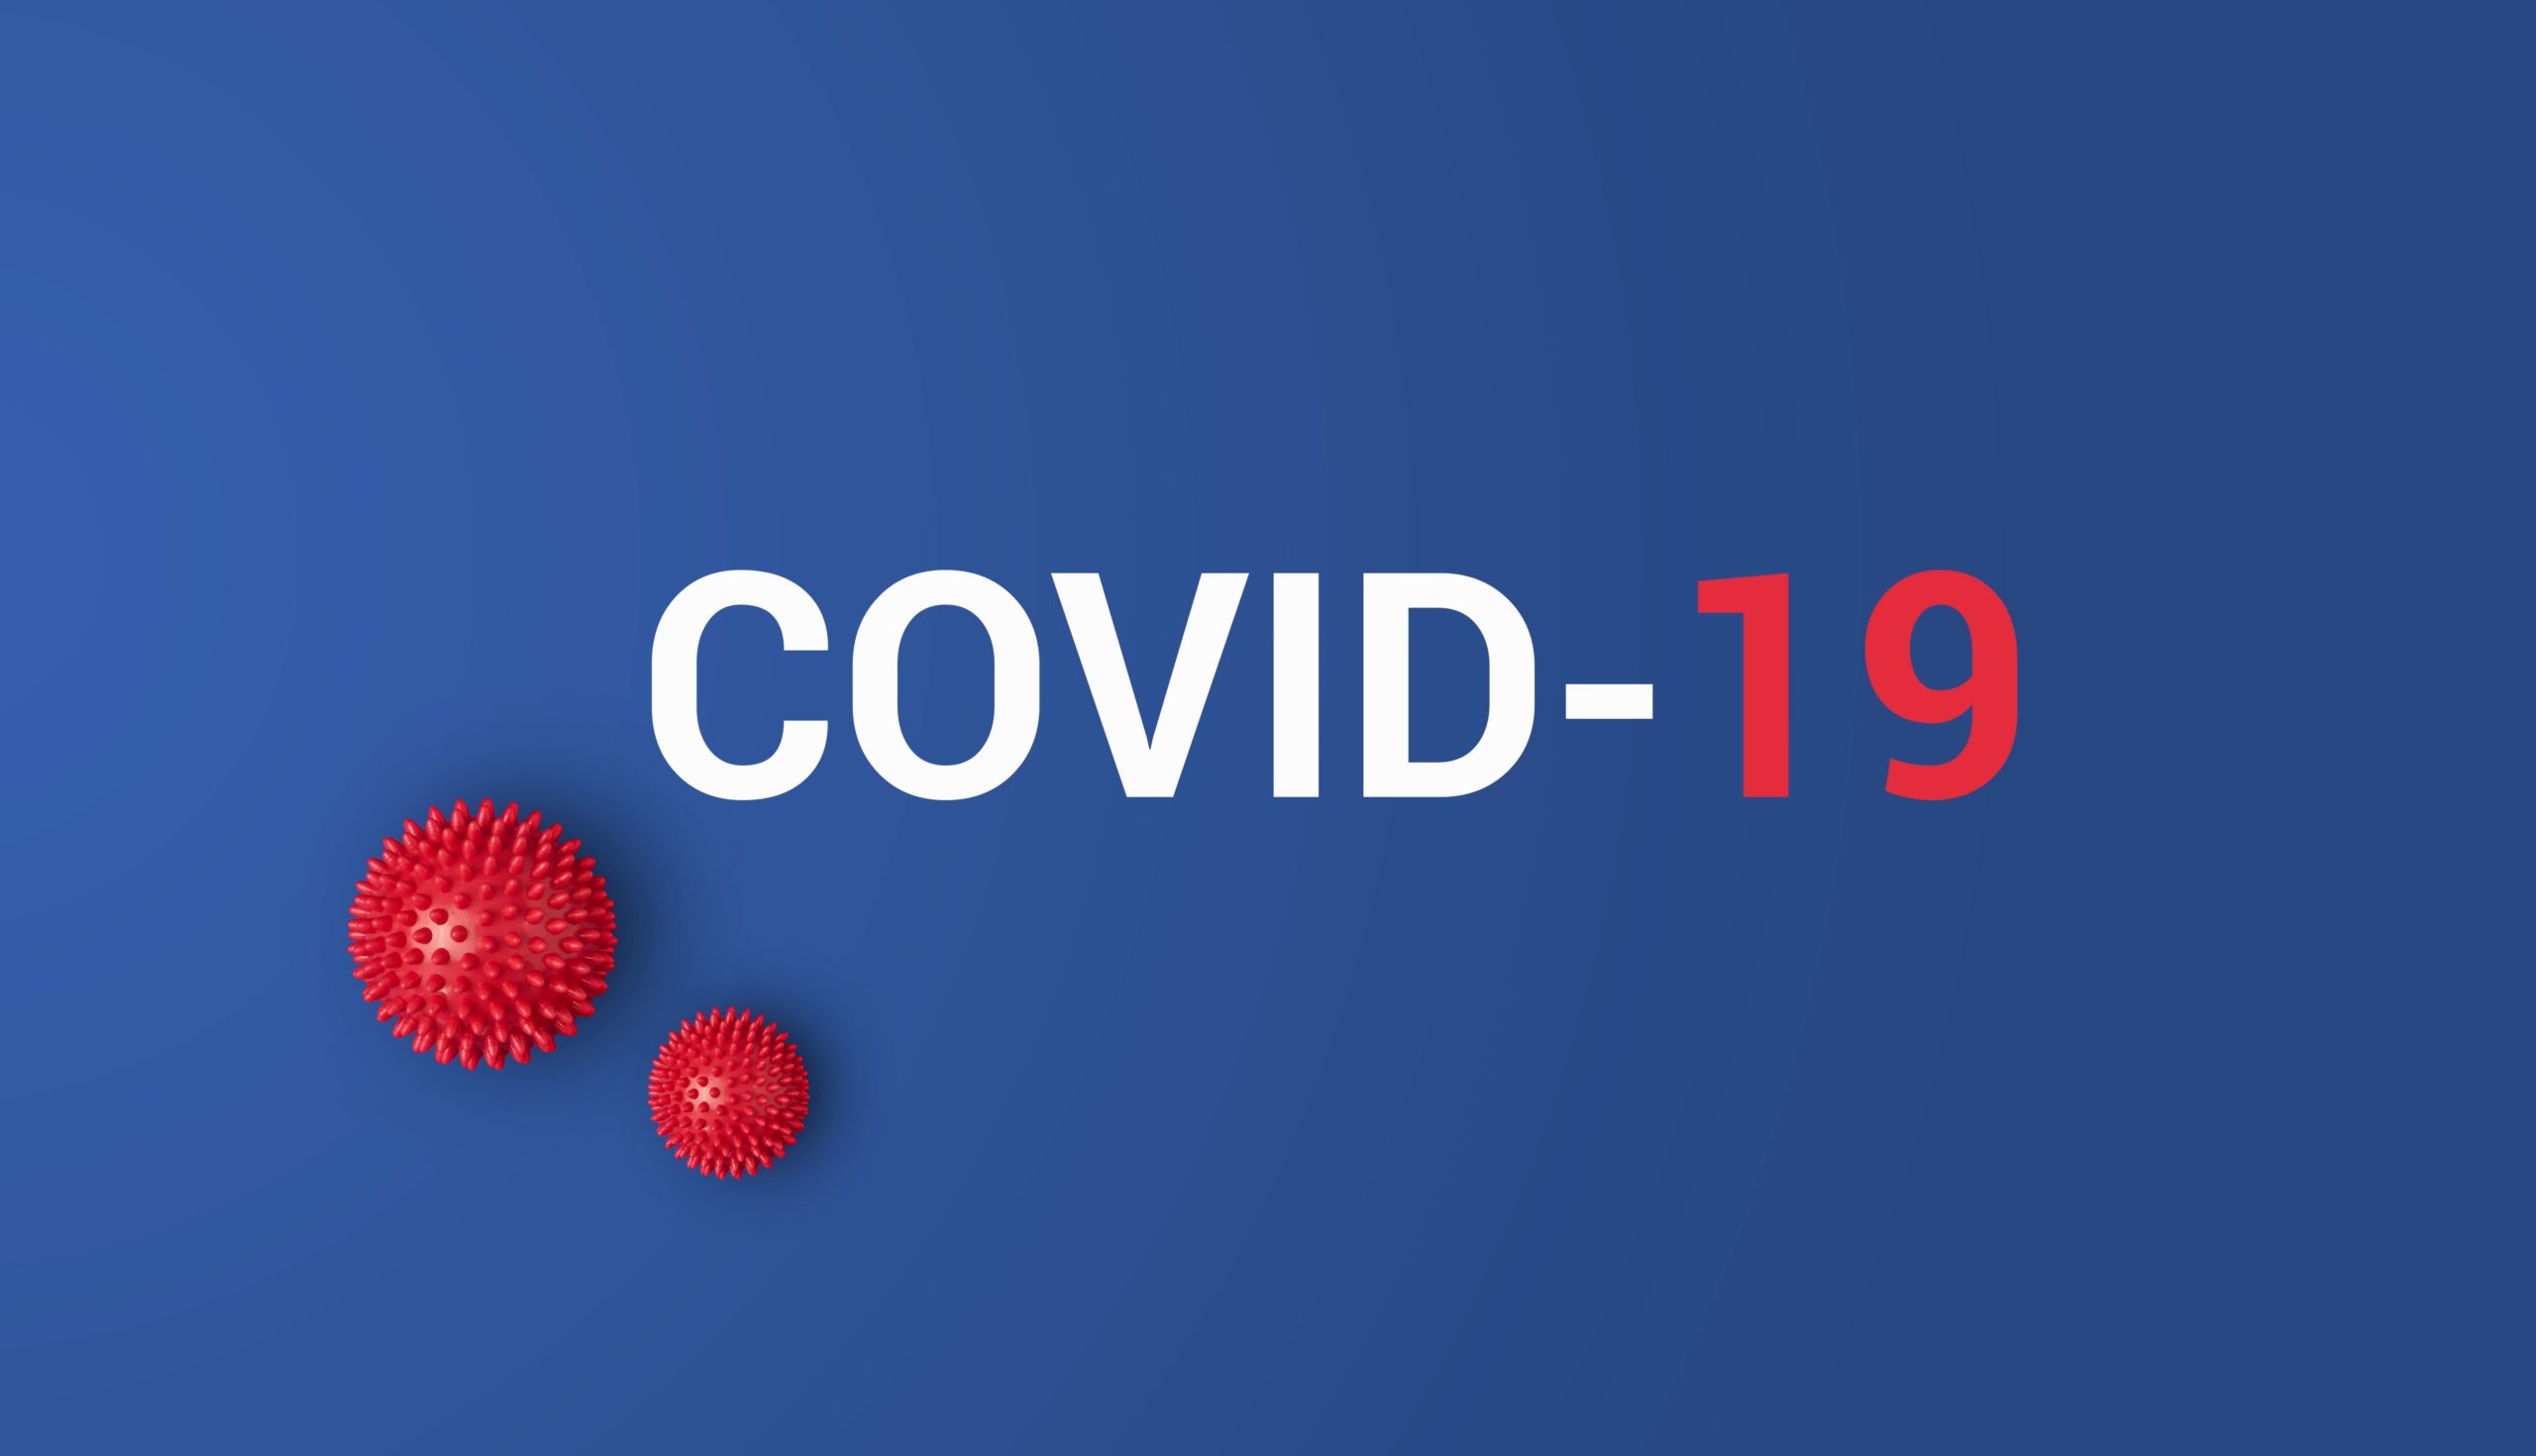 New official Coronavirus name adopted by World Health Organisation is COVID-19. Inscription COVID-19 on blue background